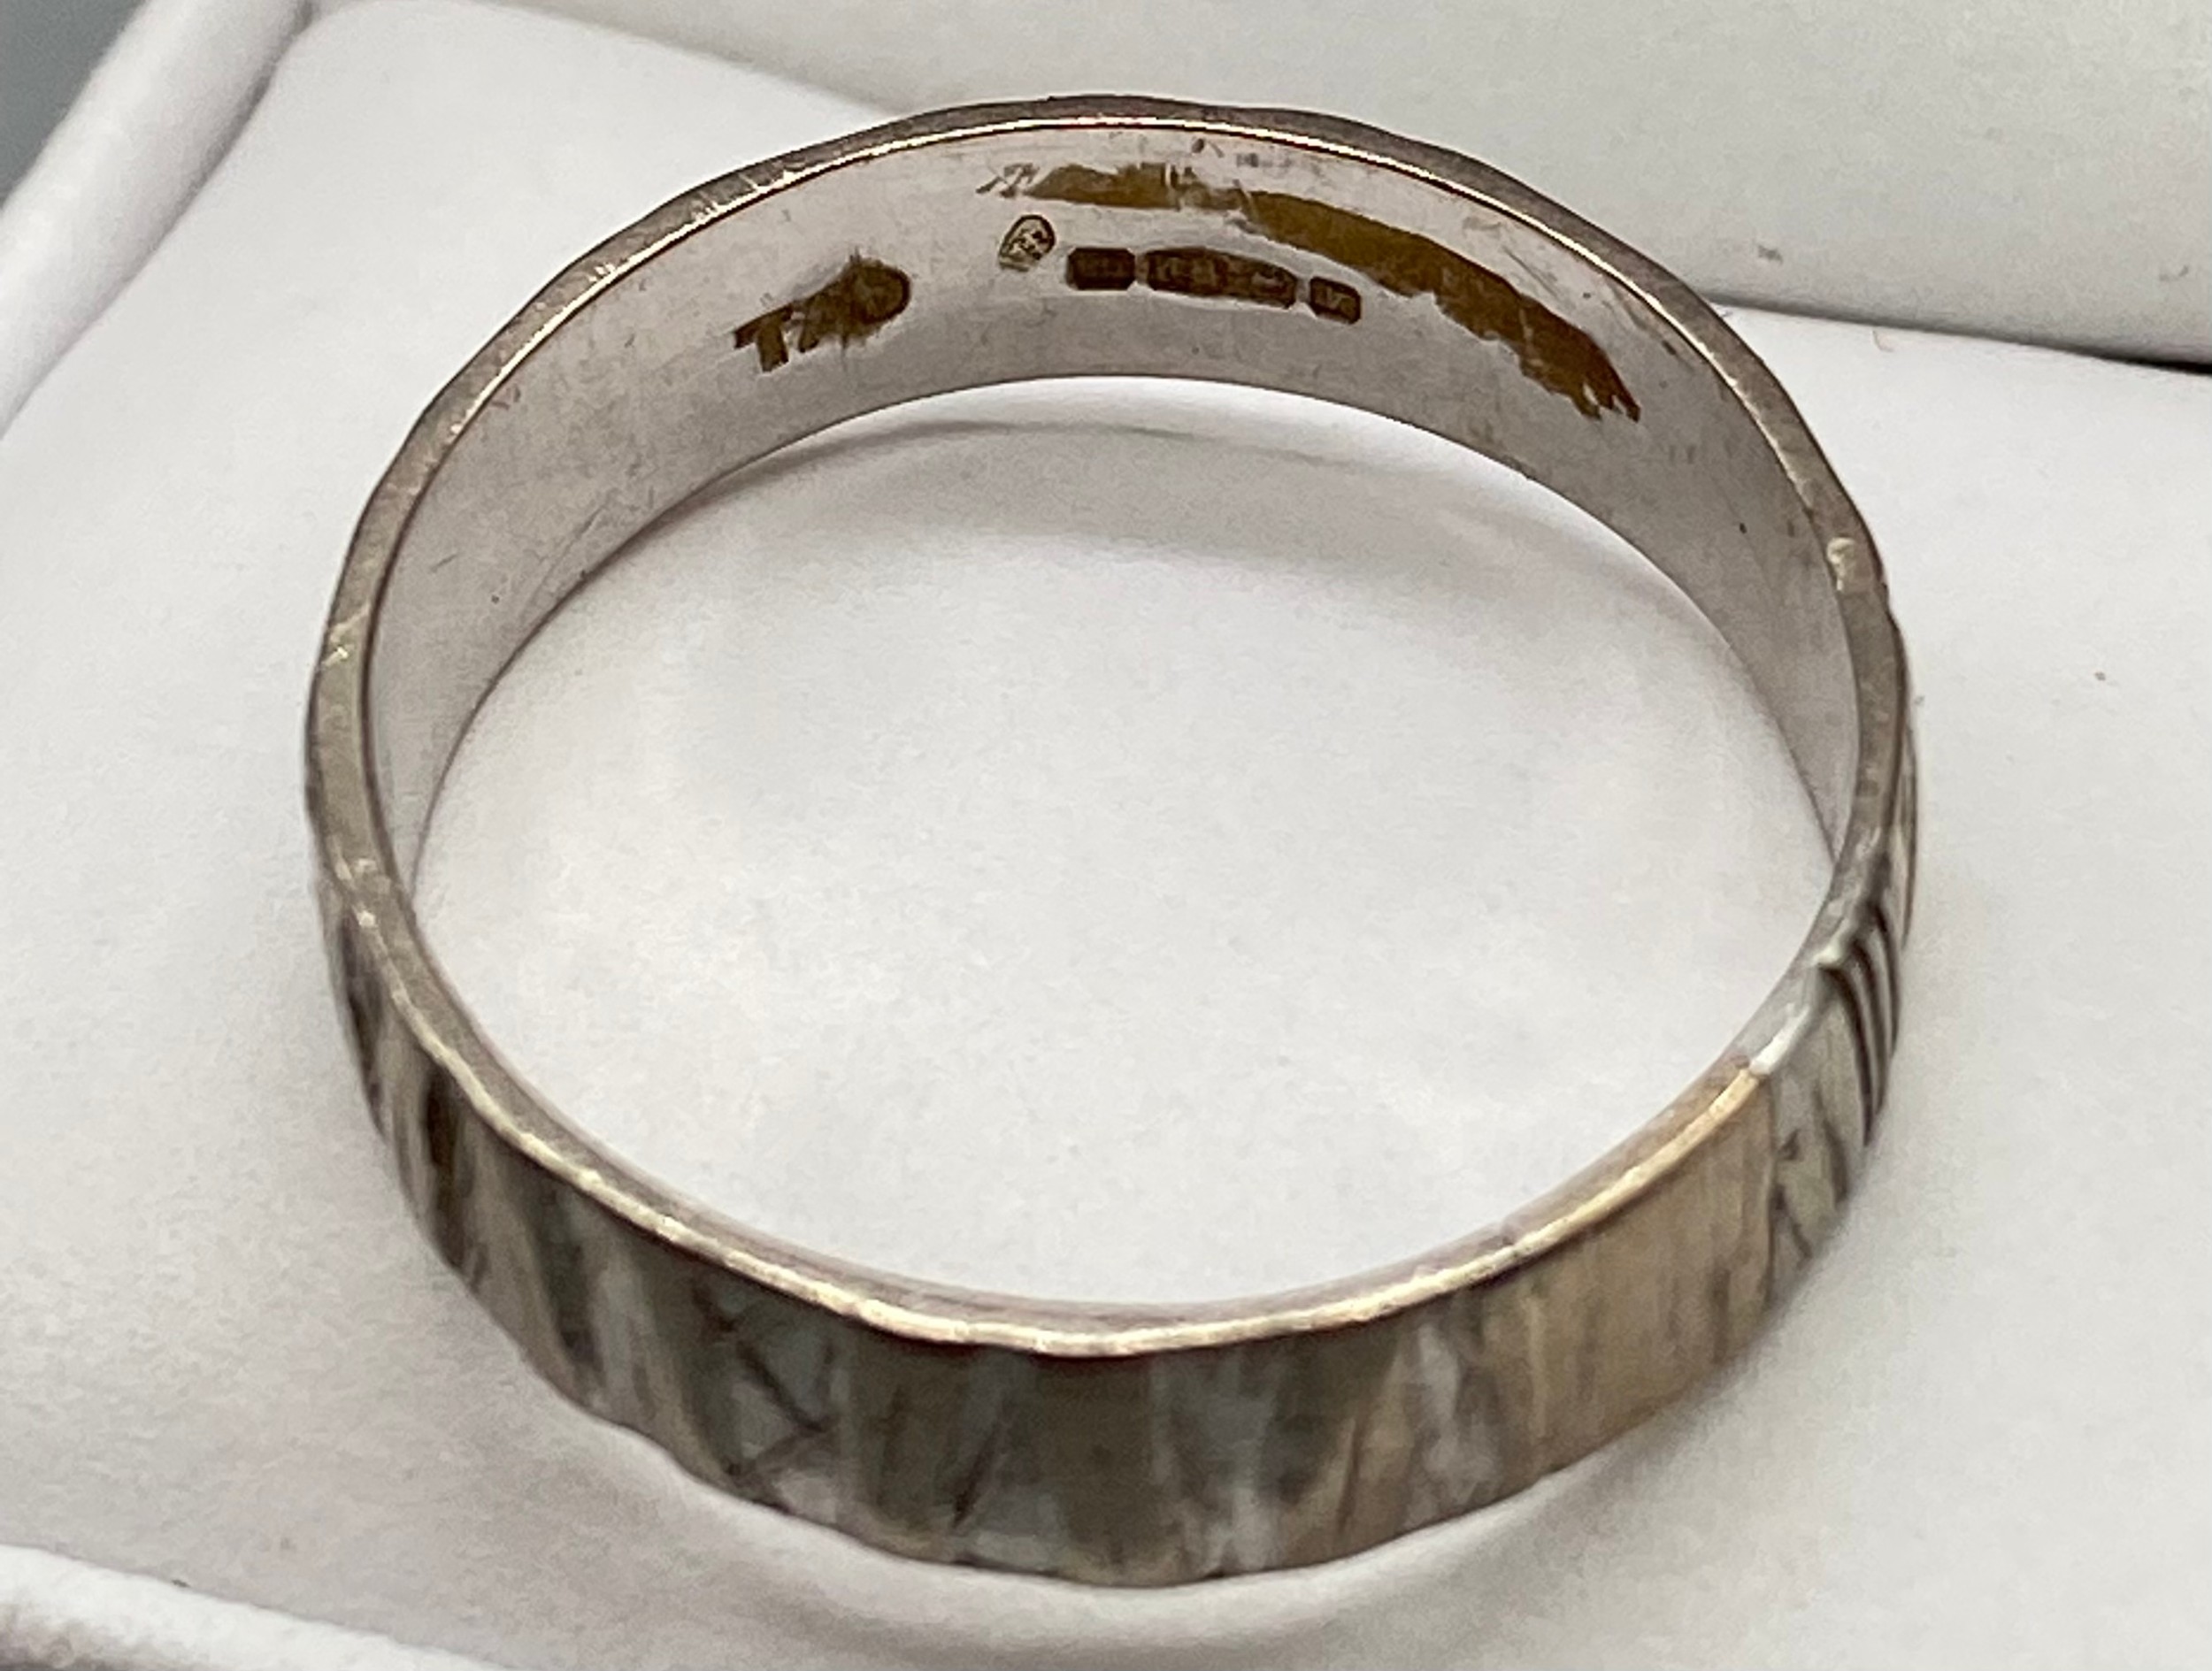 An 18ct white gold tree bark design wedding band [Ring size R][3.89grams] - Image 2 of 3